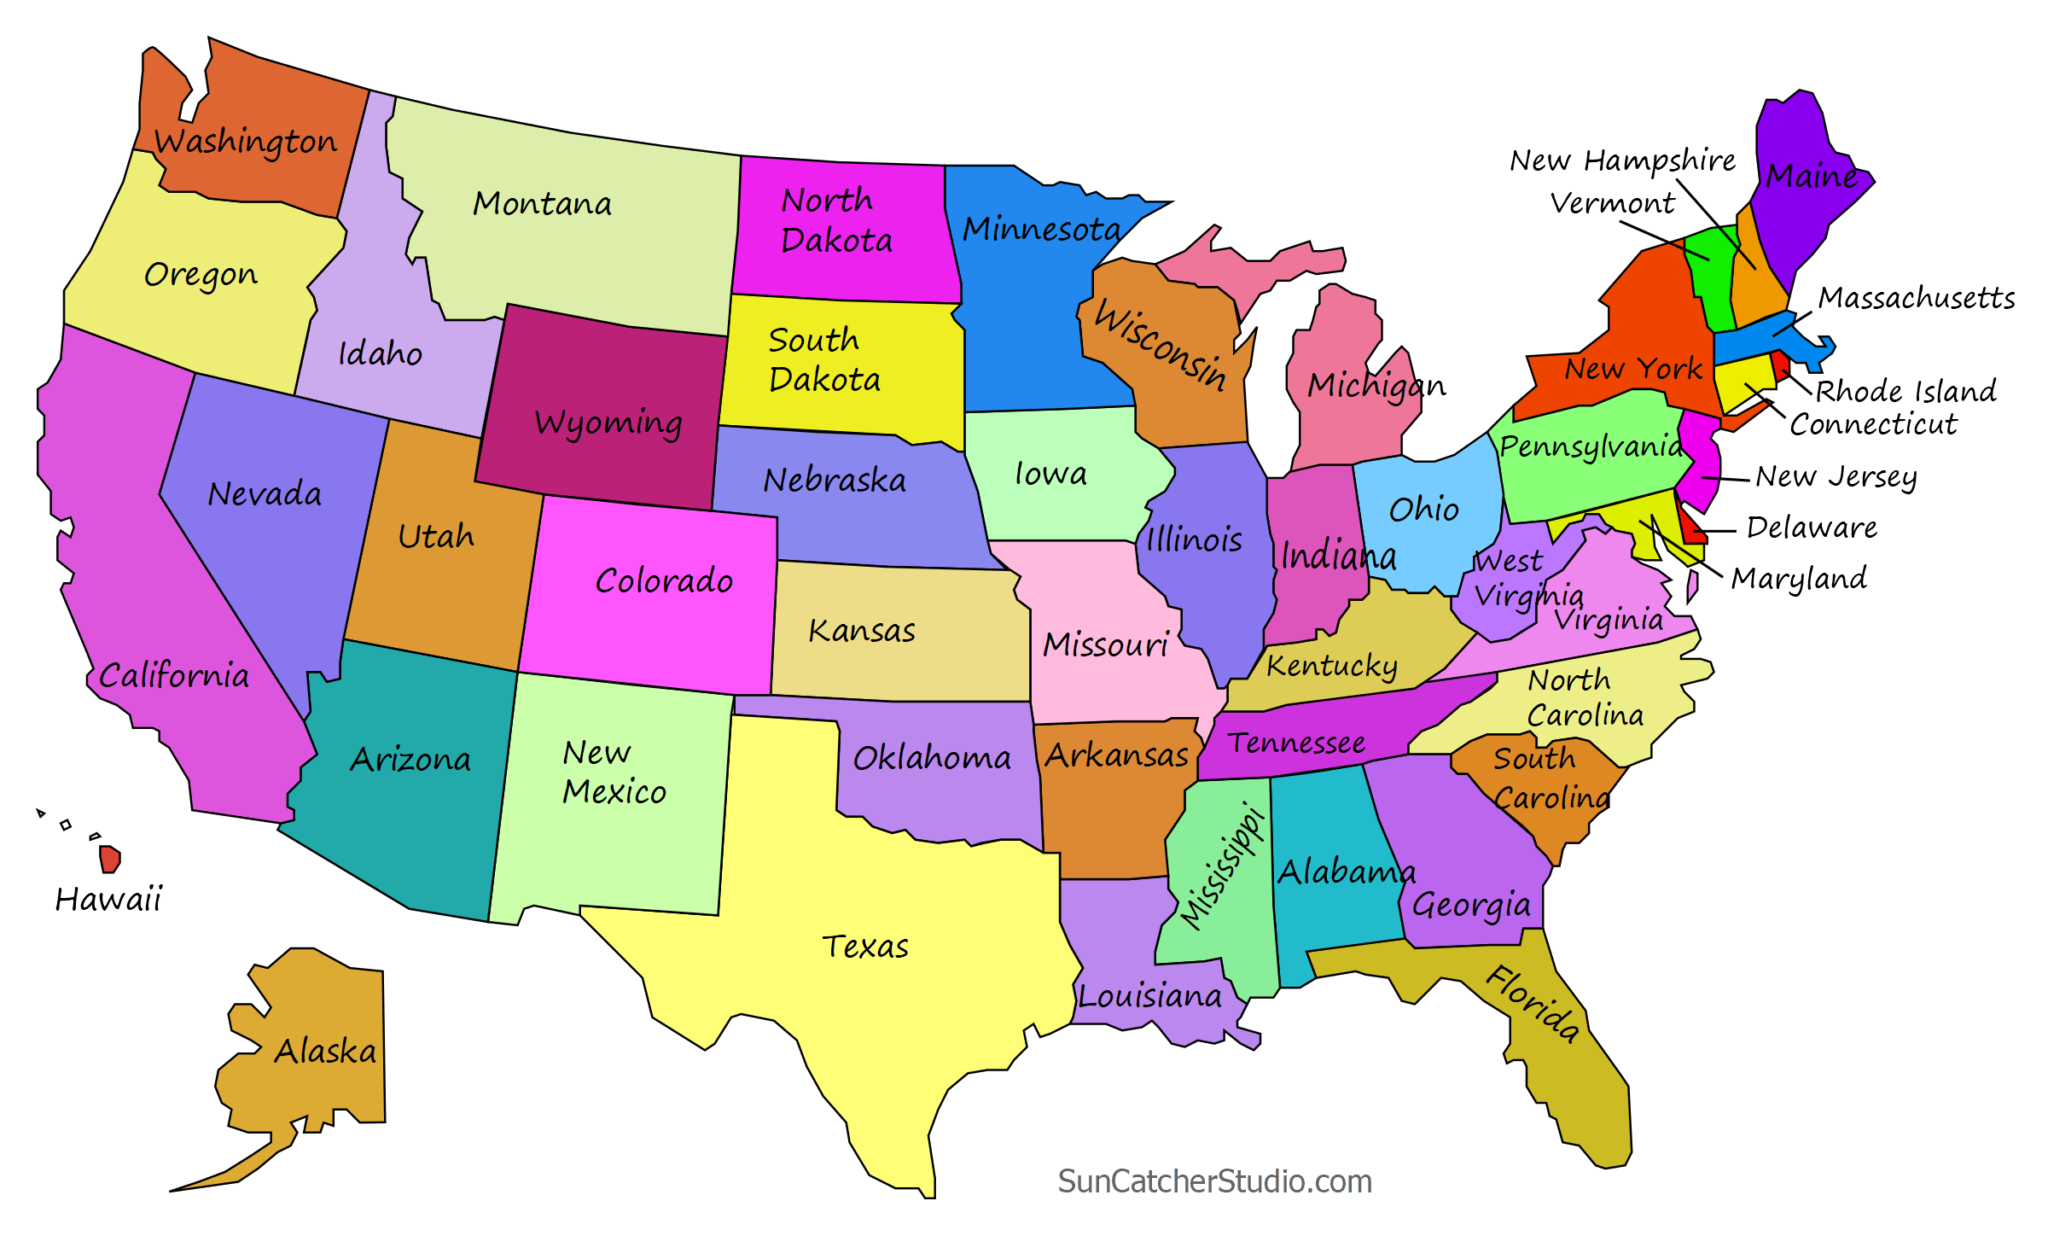 50-states-picture-map-buffalo-indians-food-hunt-native-plains